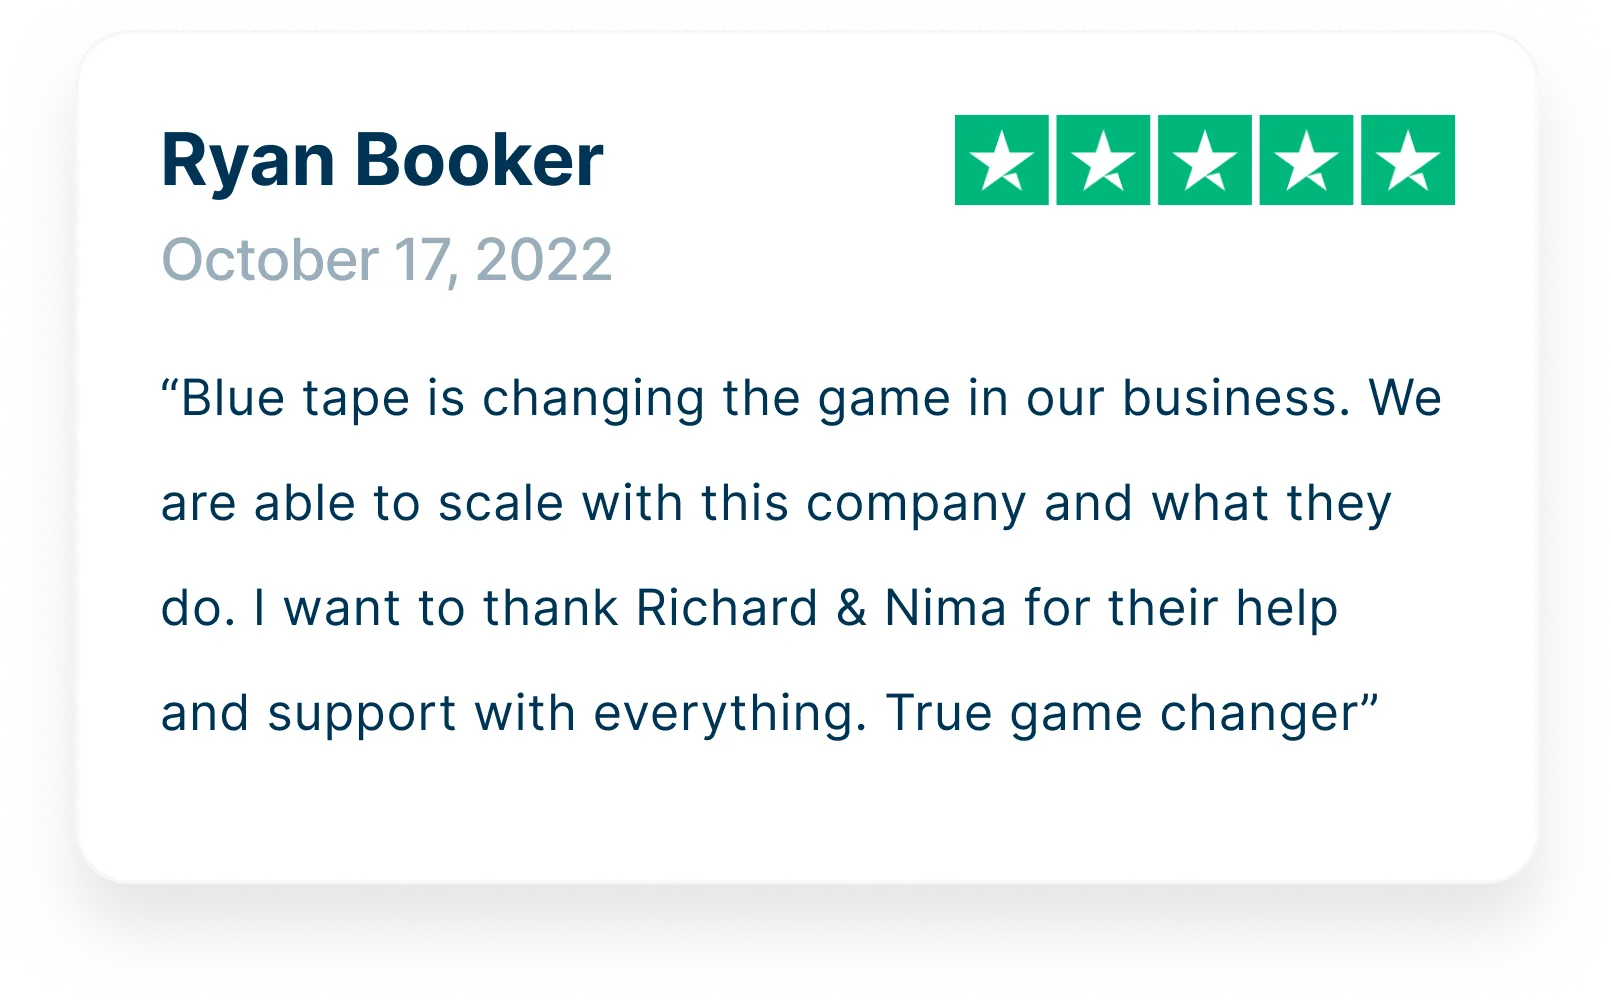 “Blue tape is changing the game in our business. We are able to scale with this company and what they do. I want to thank Richard & Nima for their help and support with everything. True game changer”